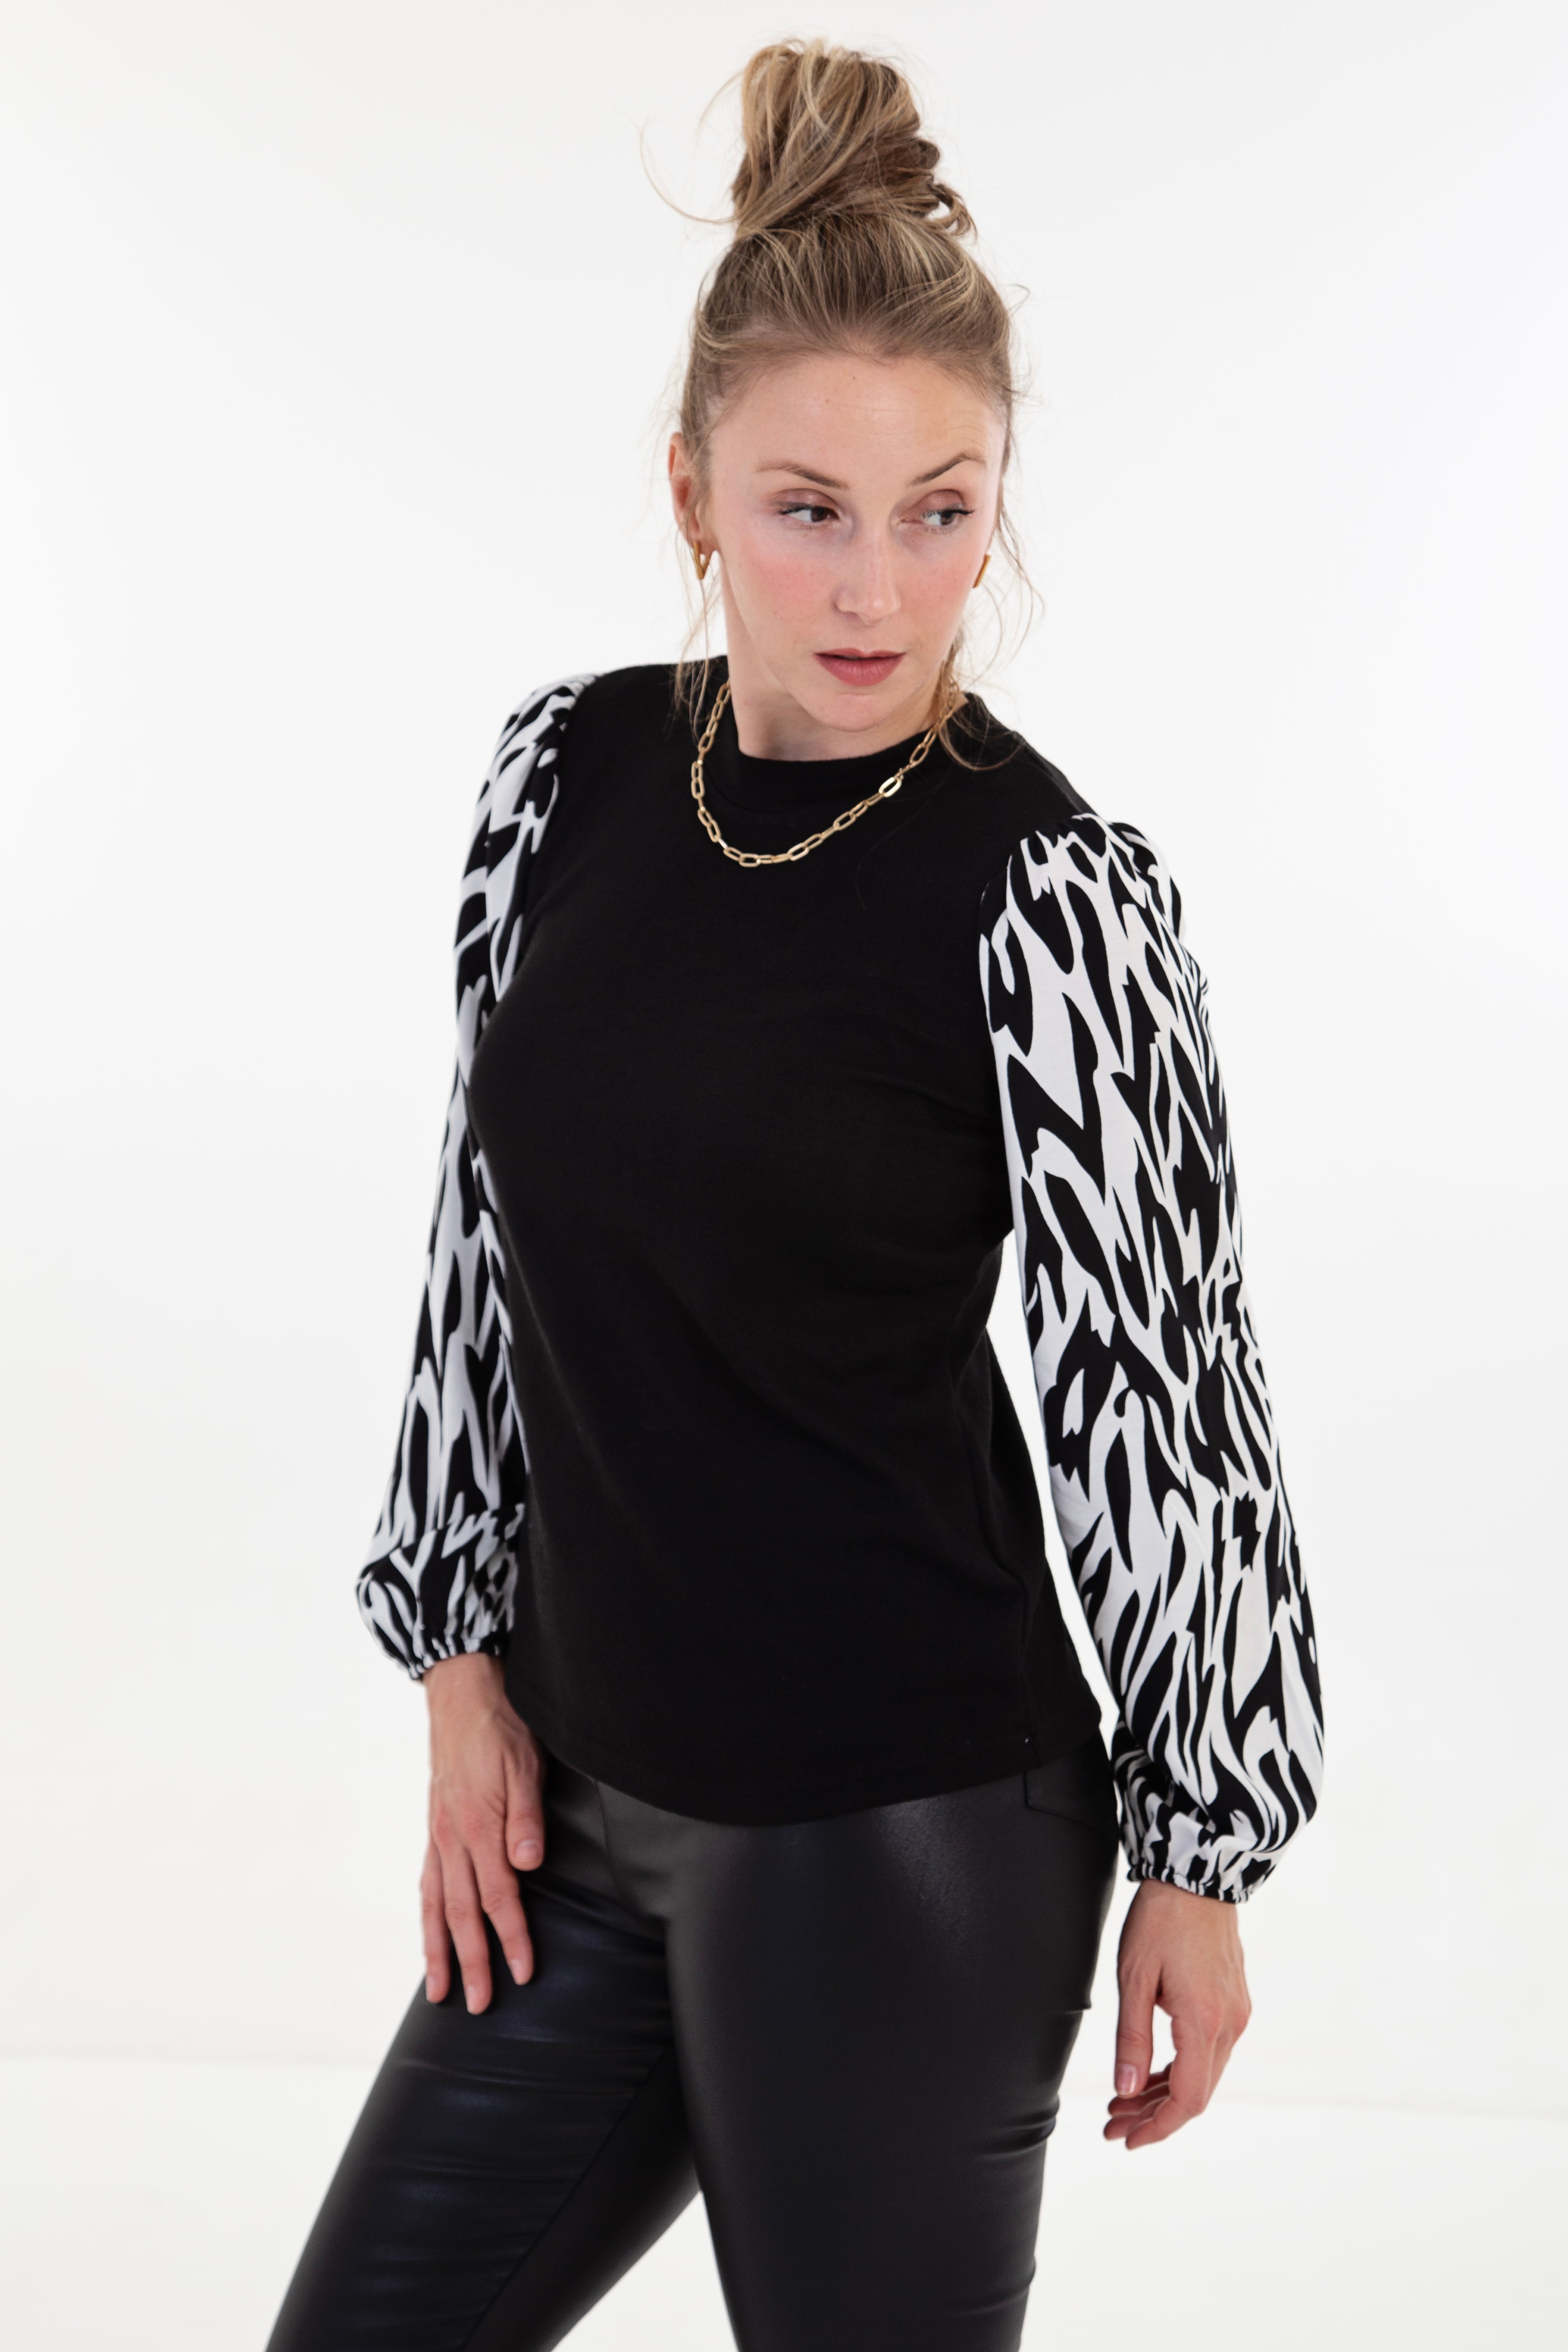 White & Black Abstract Long Sleeve Combo Top